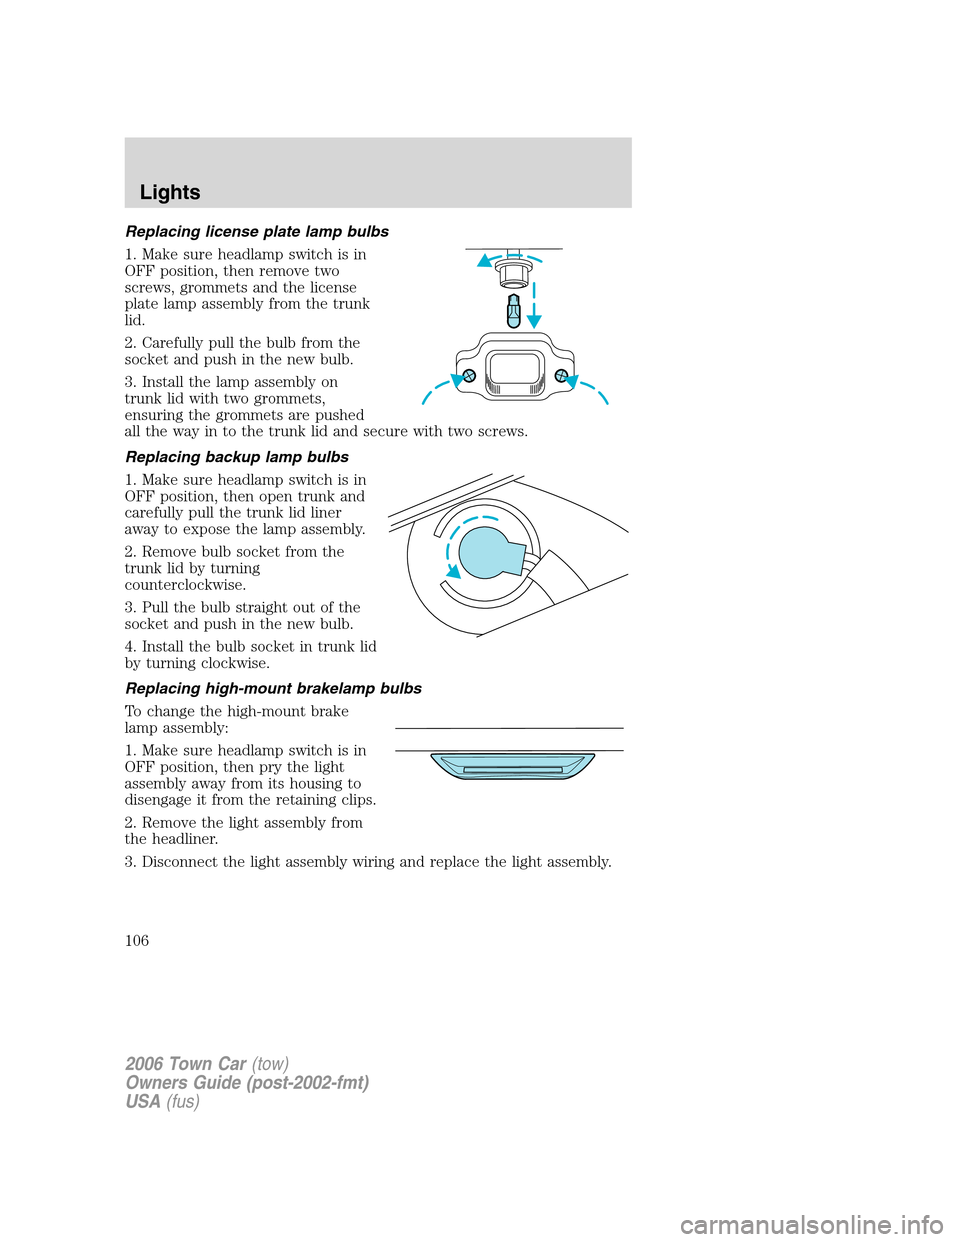 LINCOLN TOWN CAR 2006  Owners Manual Replacing license plate lamp bulbs
1. Make sure headlamp switch is in
OFF position, then remove two
screws, grommets and the license
plate lamp assembly from the trunk
lid.
2. Carefully pull the bulb 